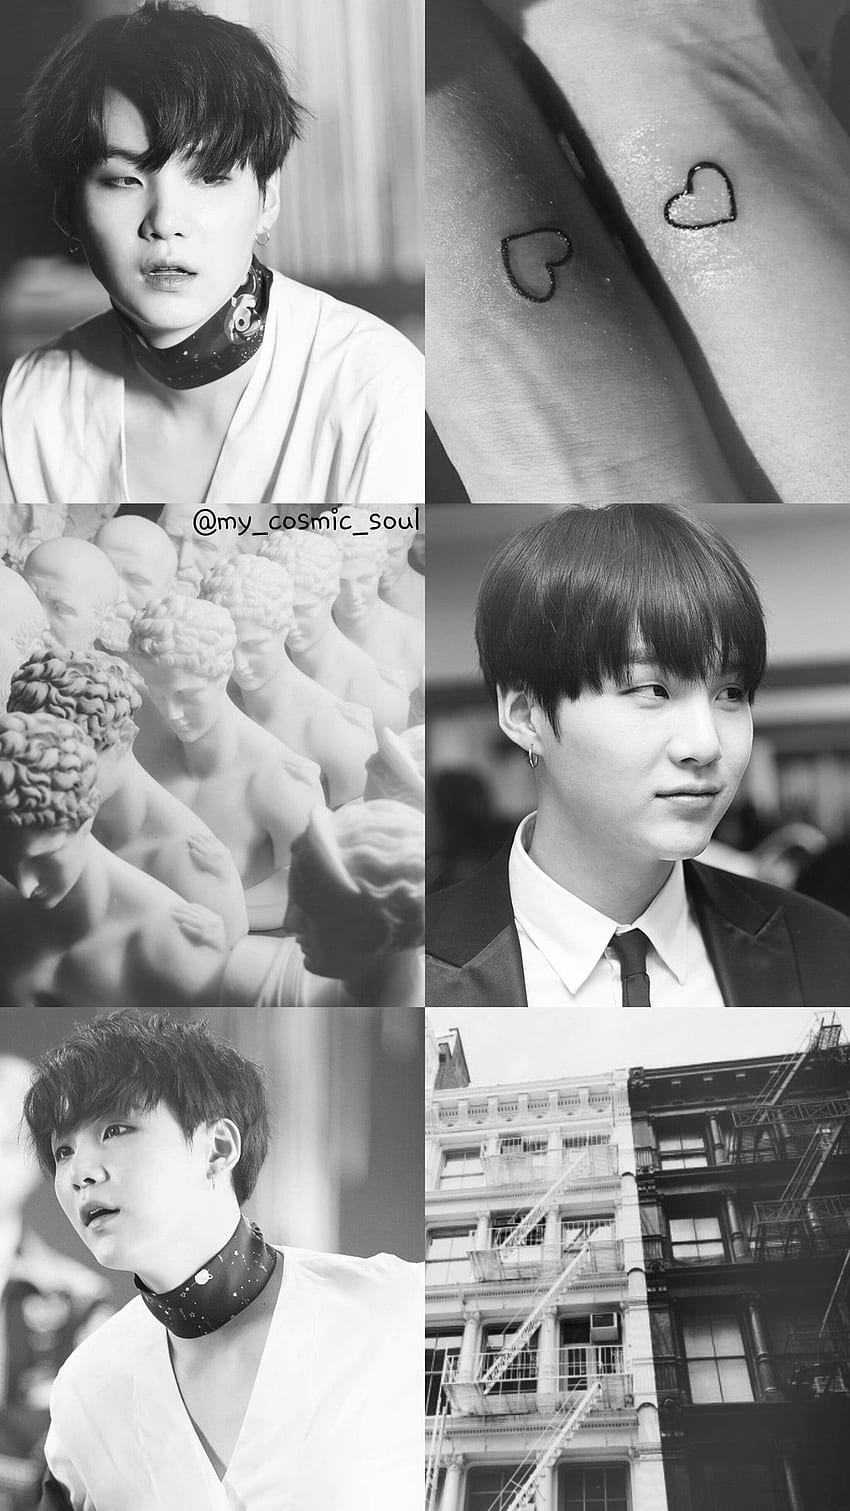 I made a black and white RM wallpaper! Let me know if you want me to make one for the other members! - Suga